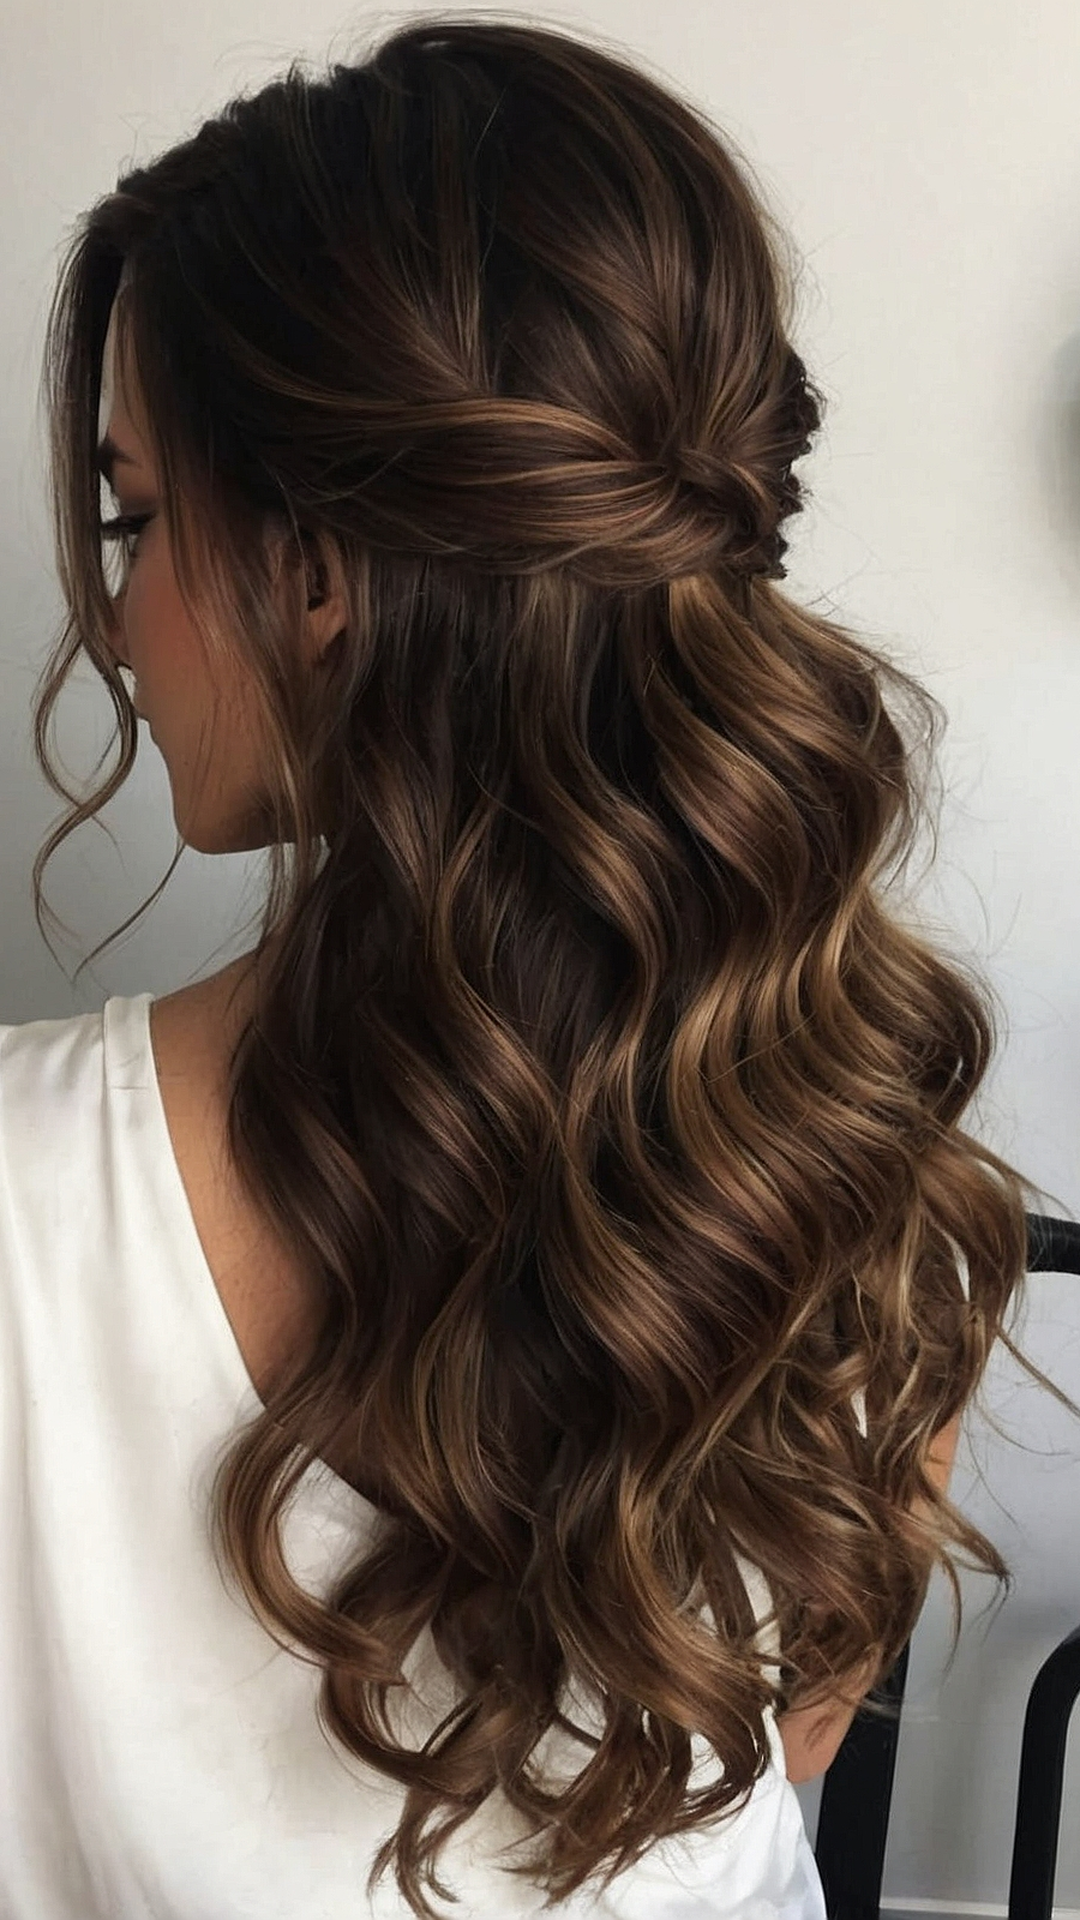 Flowing Waves: Gorgeous Wavy Hair Inspirations